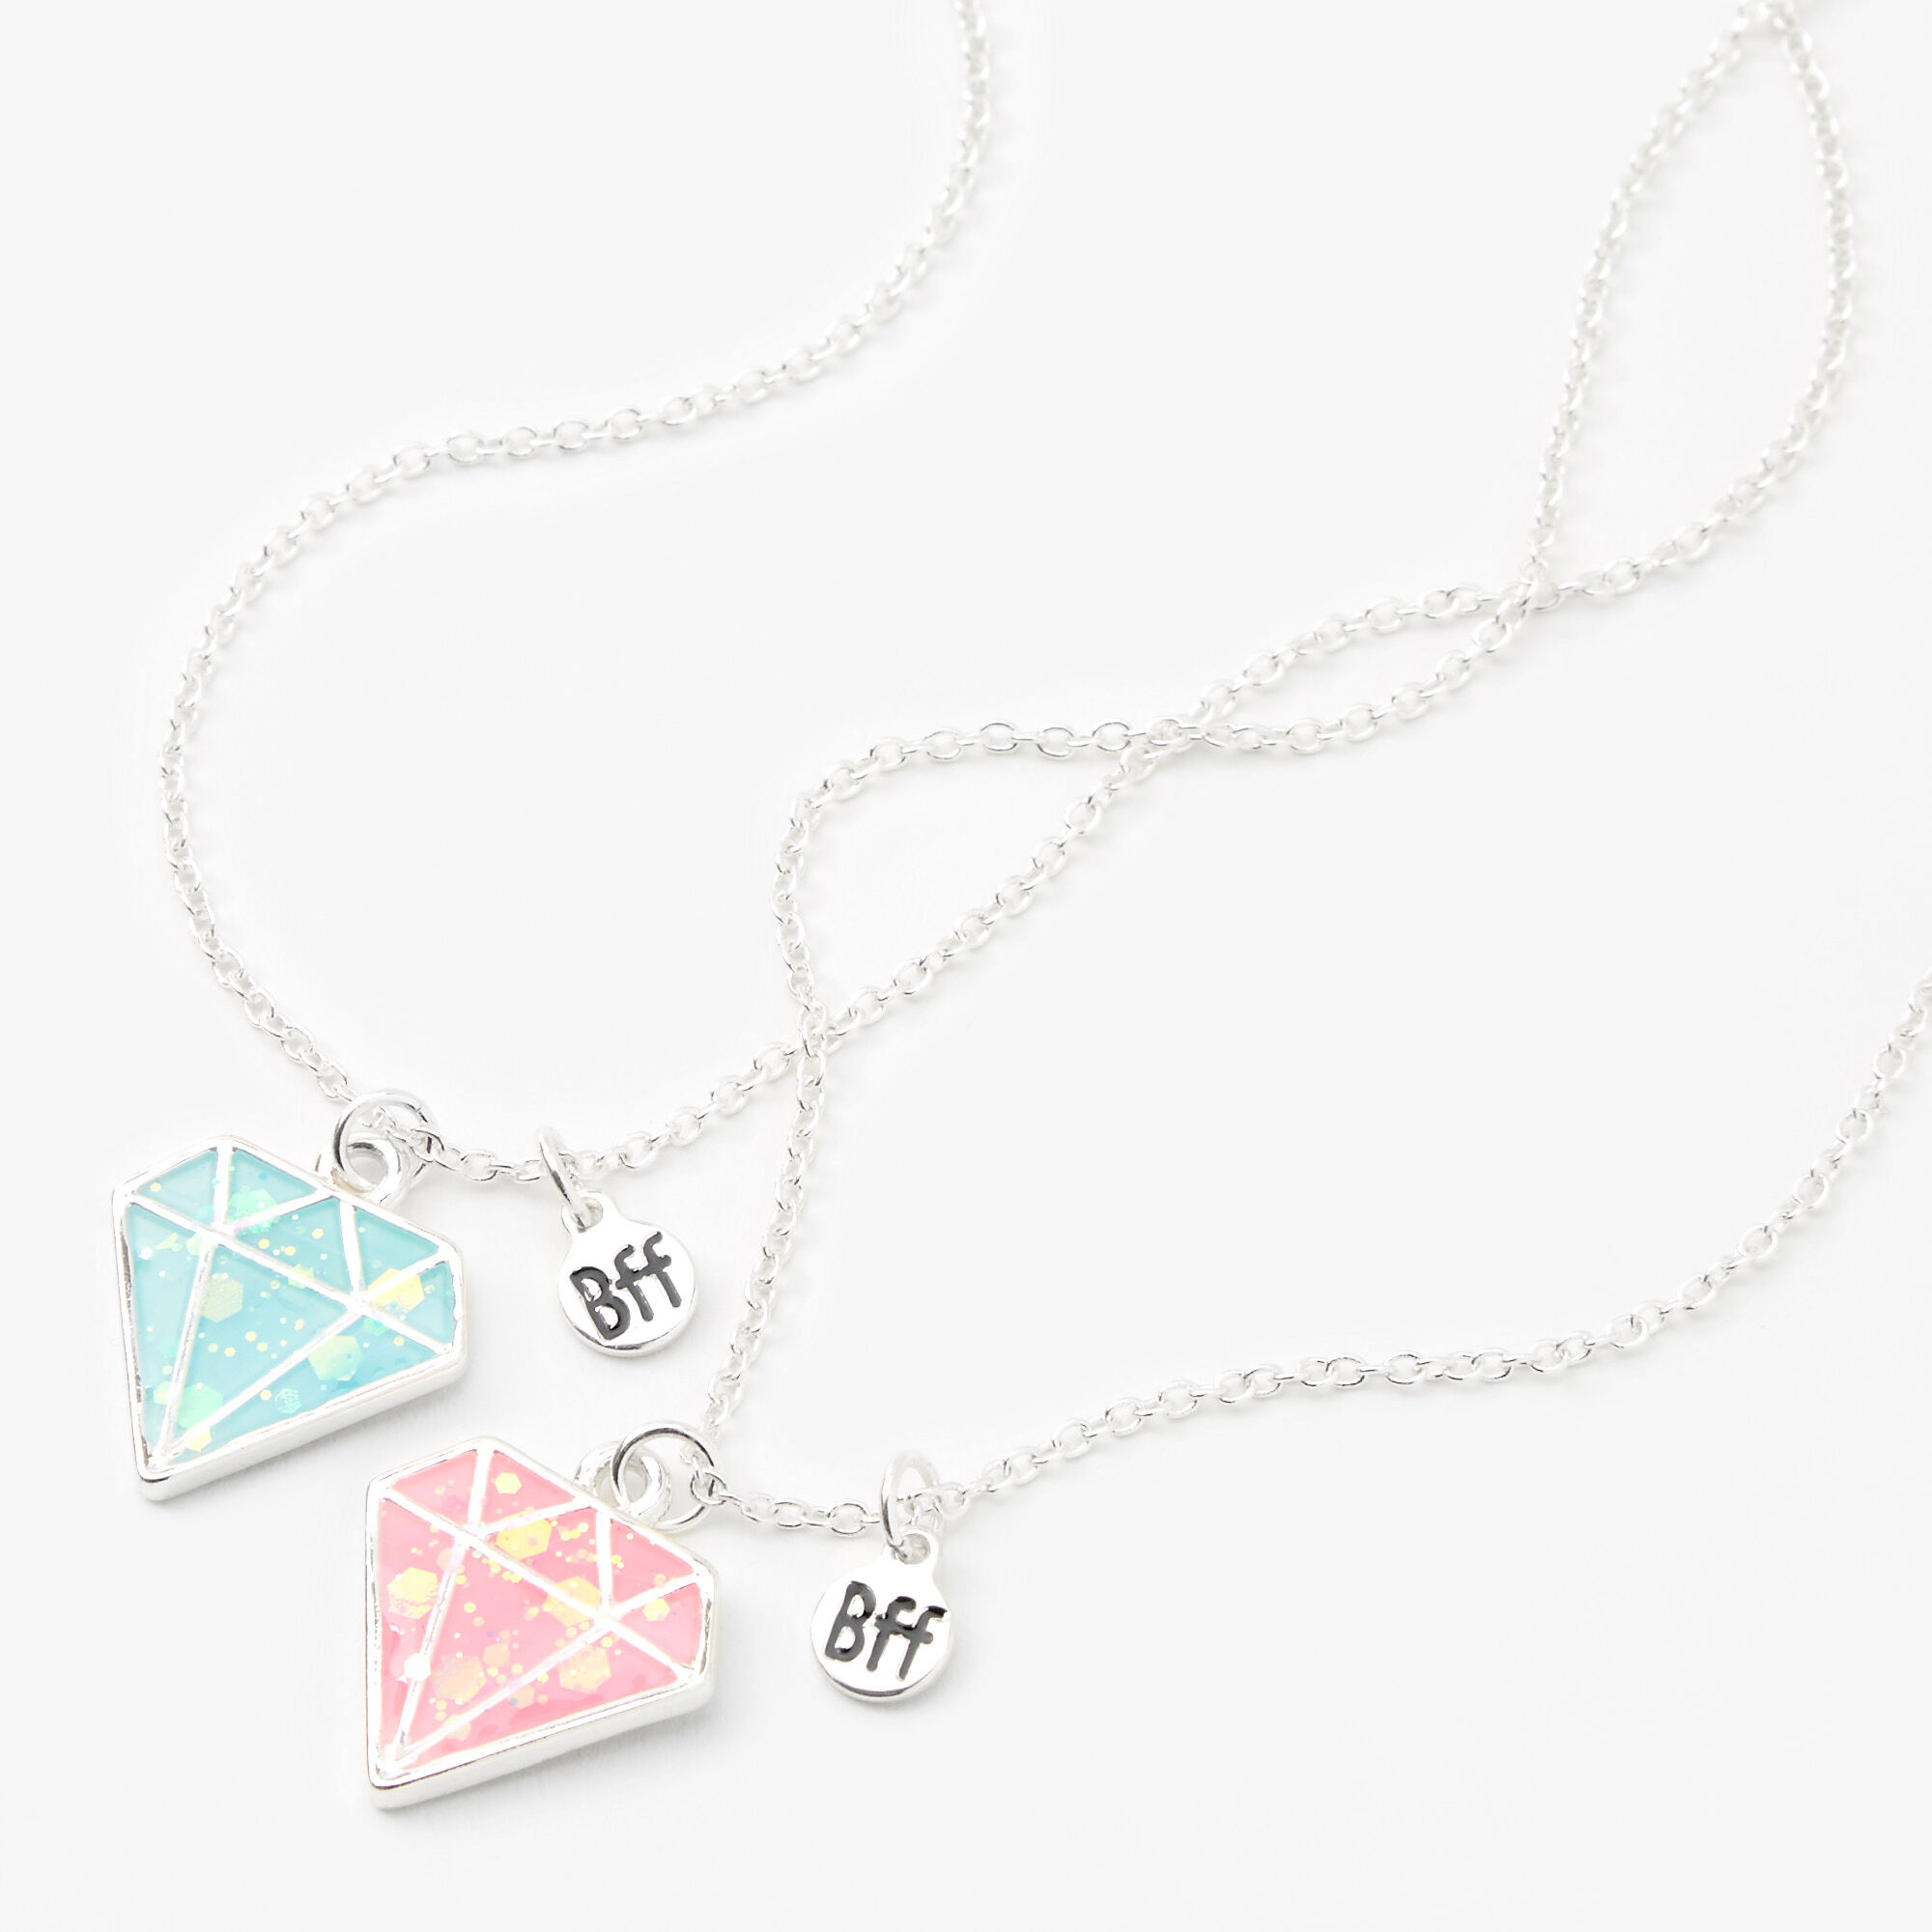 5 BFF Puzzle Piece Necklaces Best Friends or Family Gifts - Etsy | Puzzle  piece necklace, Friend necklaces, Family necklace